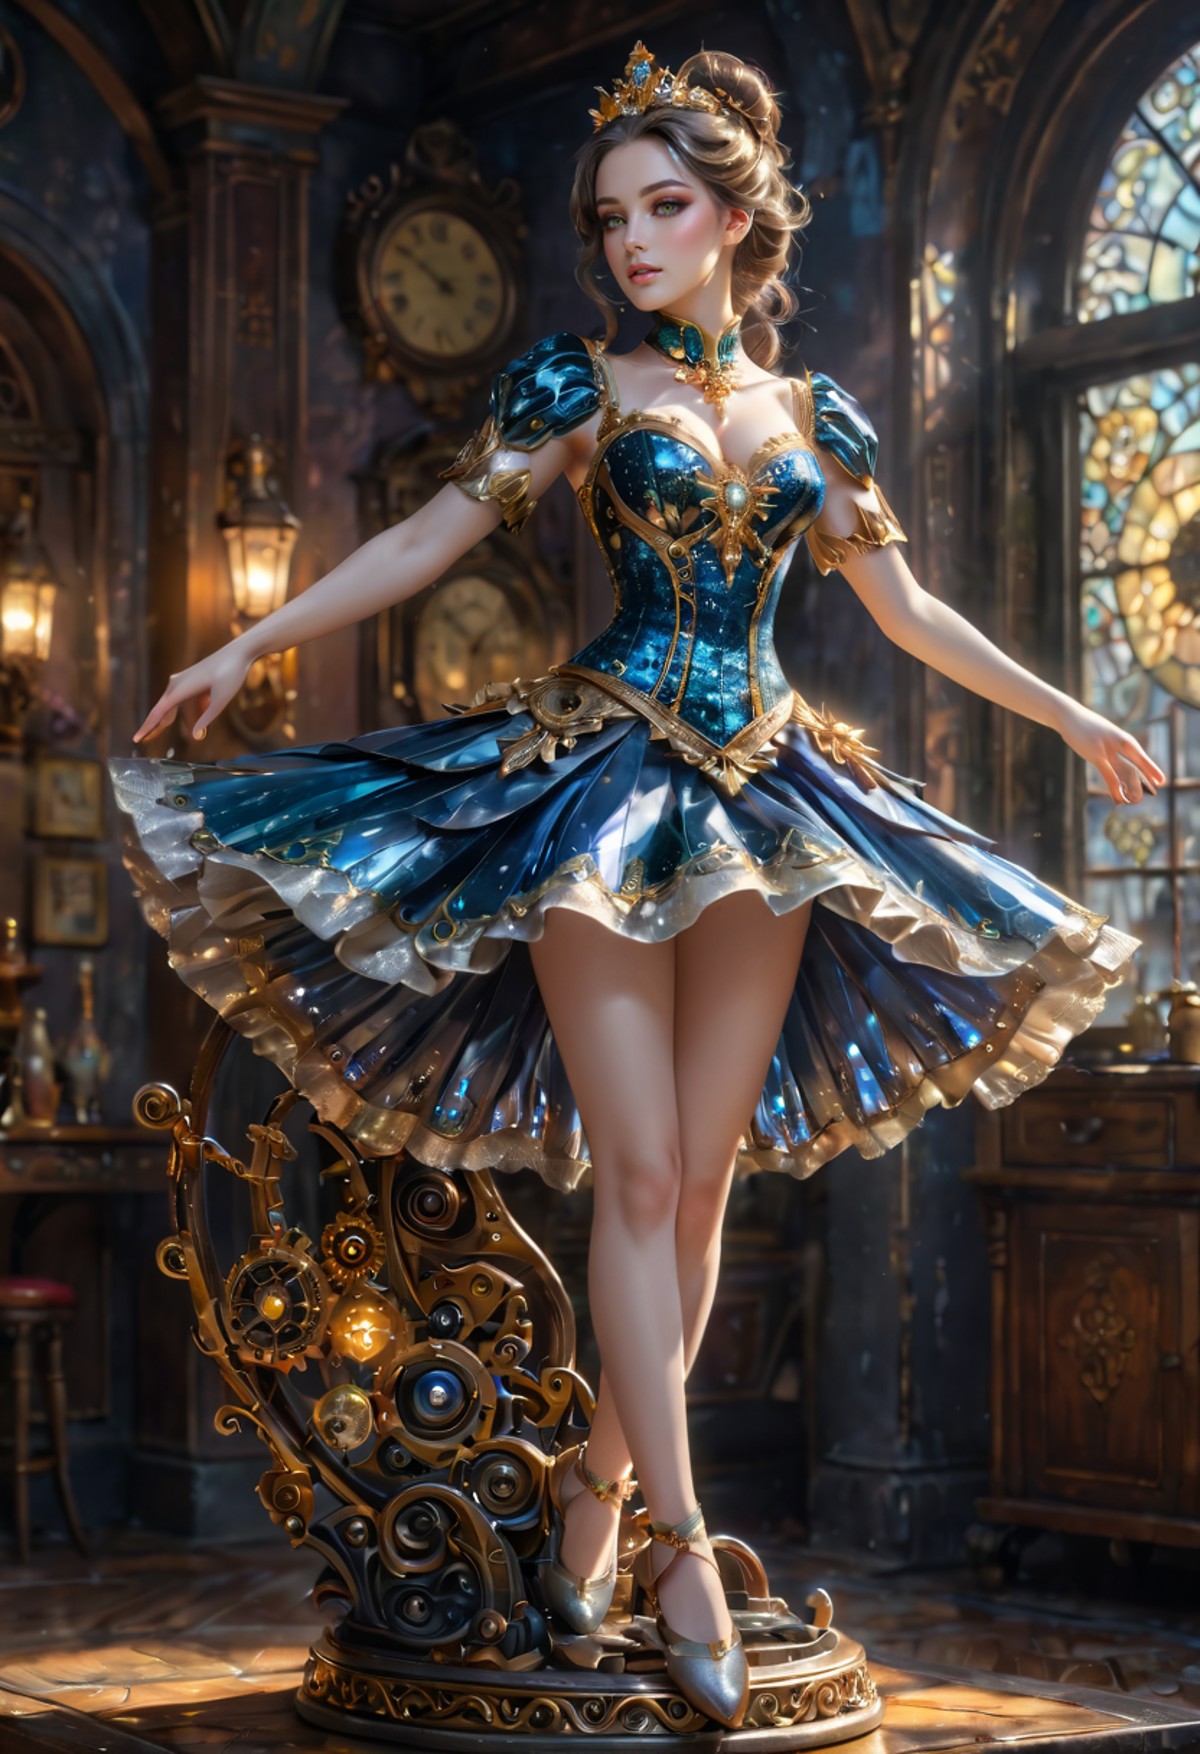 breathtaking An exquisite and breathtaking painting captures a delicate figurine, a porcelain ballerina, beautiful woman. ...